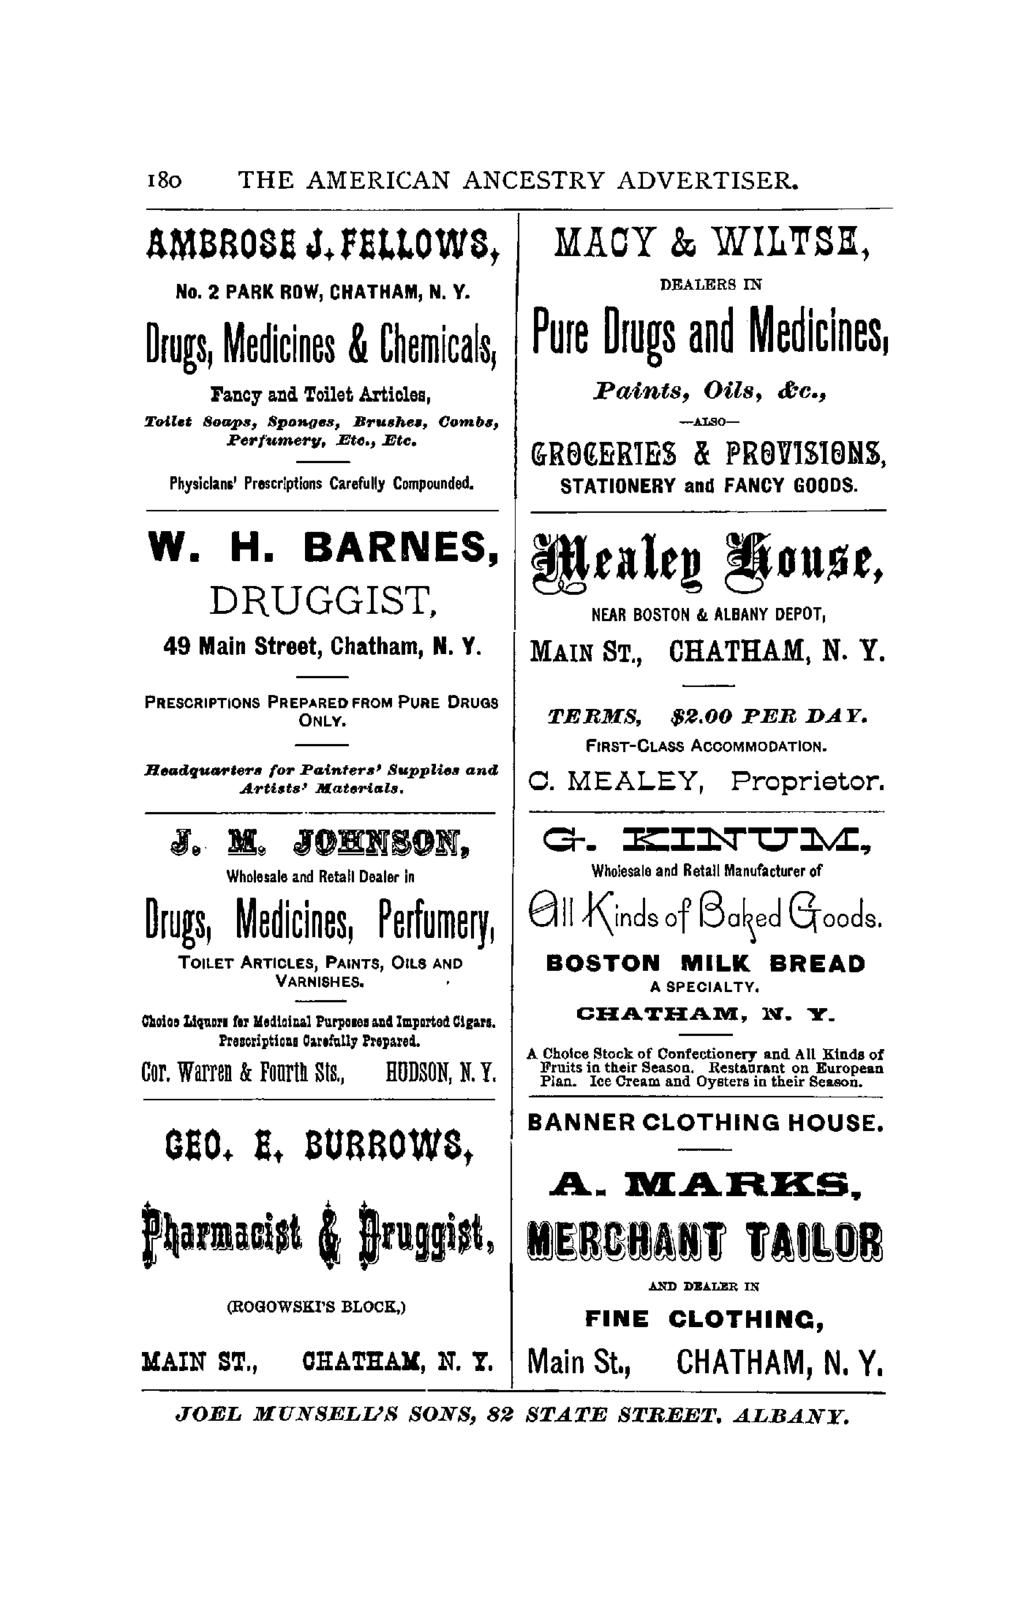 180 THE AMERICAN ANCESTRY ADVERTISER. No.2 PARK ROW, CHATHAM, N. Y. Drugs, Medicines & C~emicals, Fa.ncy a.nd Toilet Articles, Toilet Soaps, SpoRges, Bru.hes, (Jomb., Perfumer", Eto., Etc.